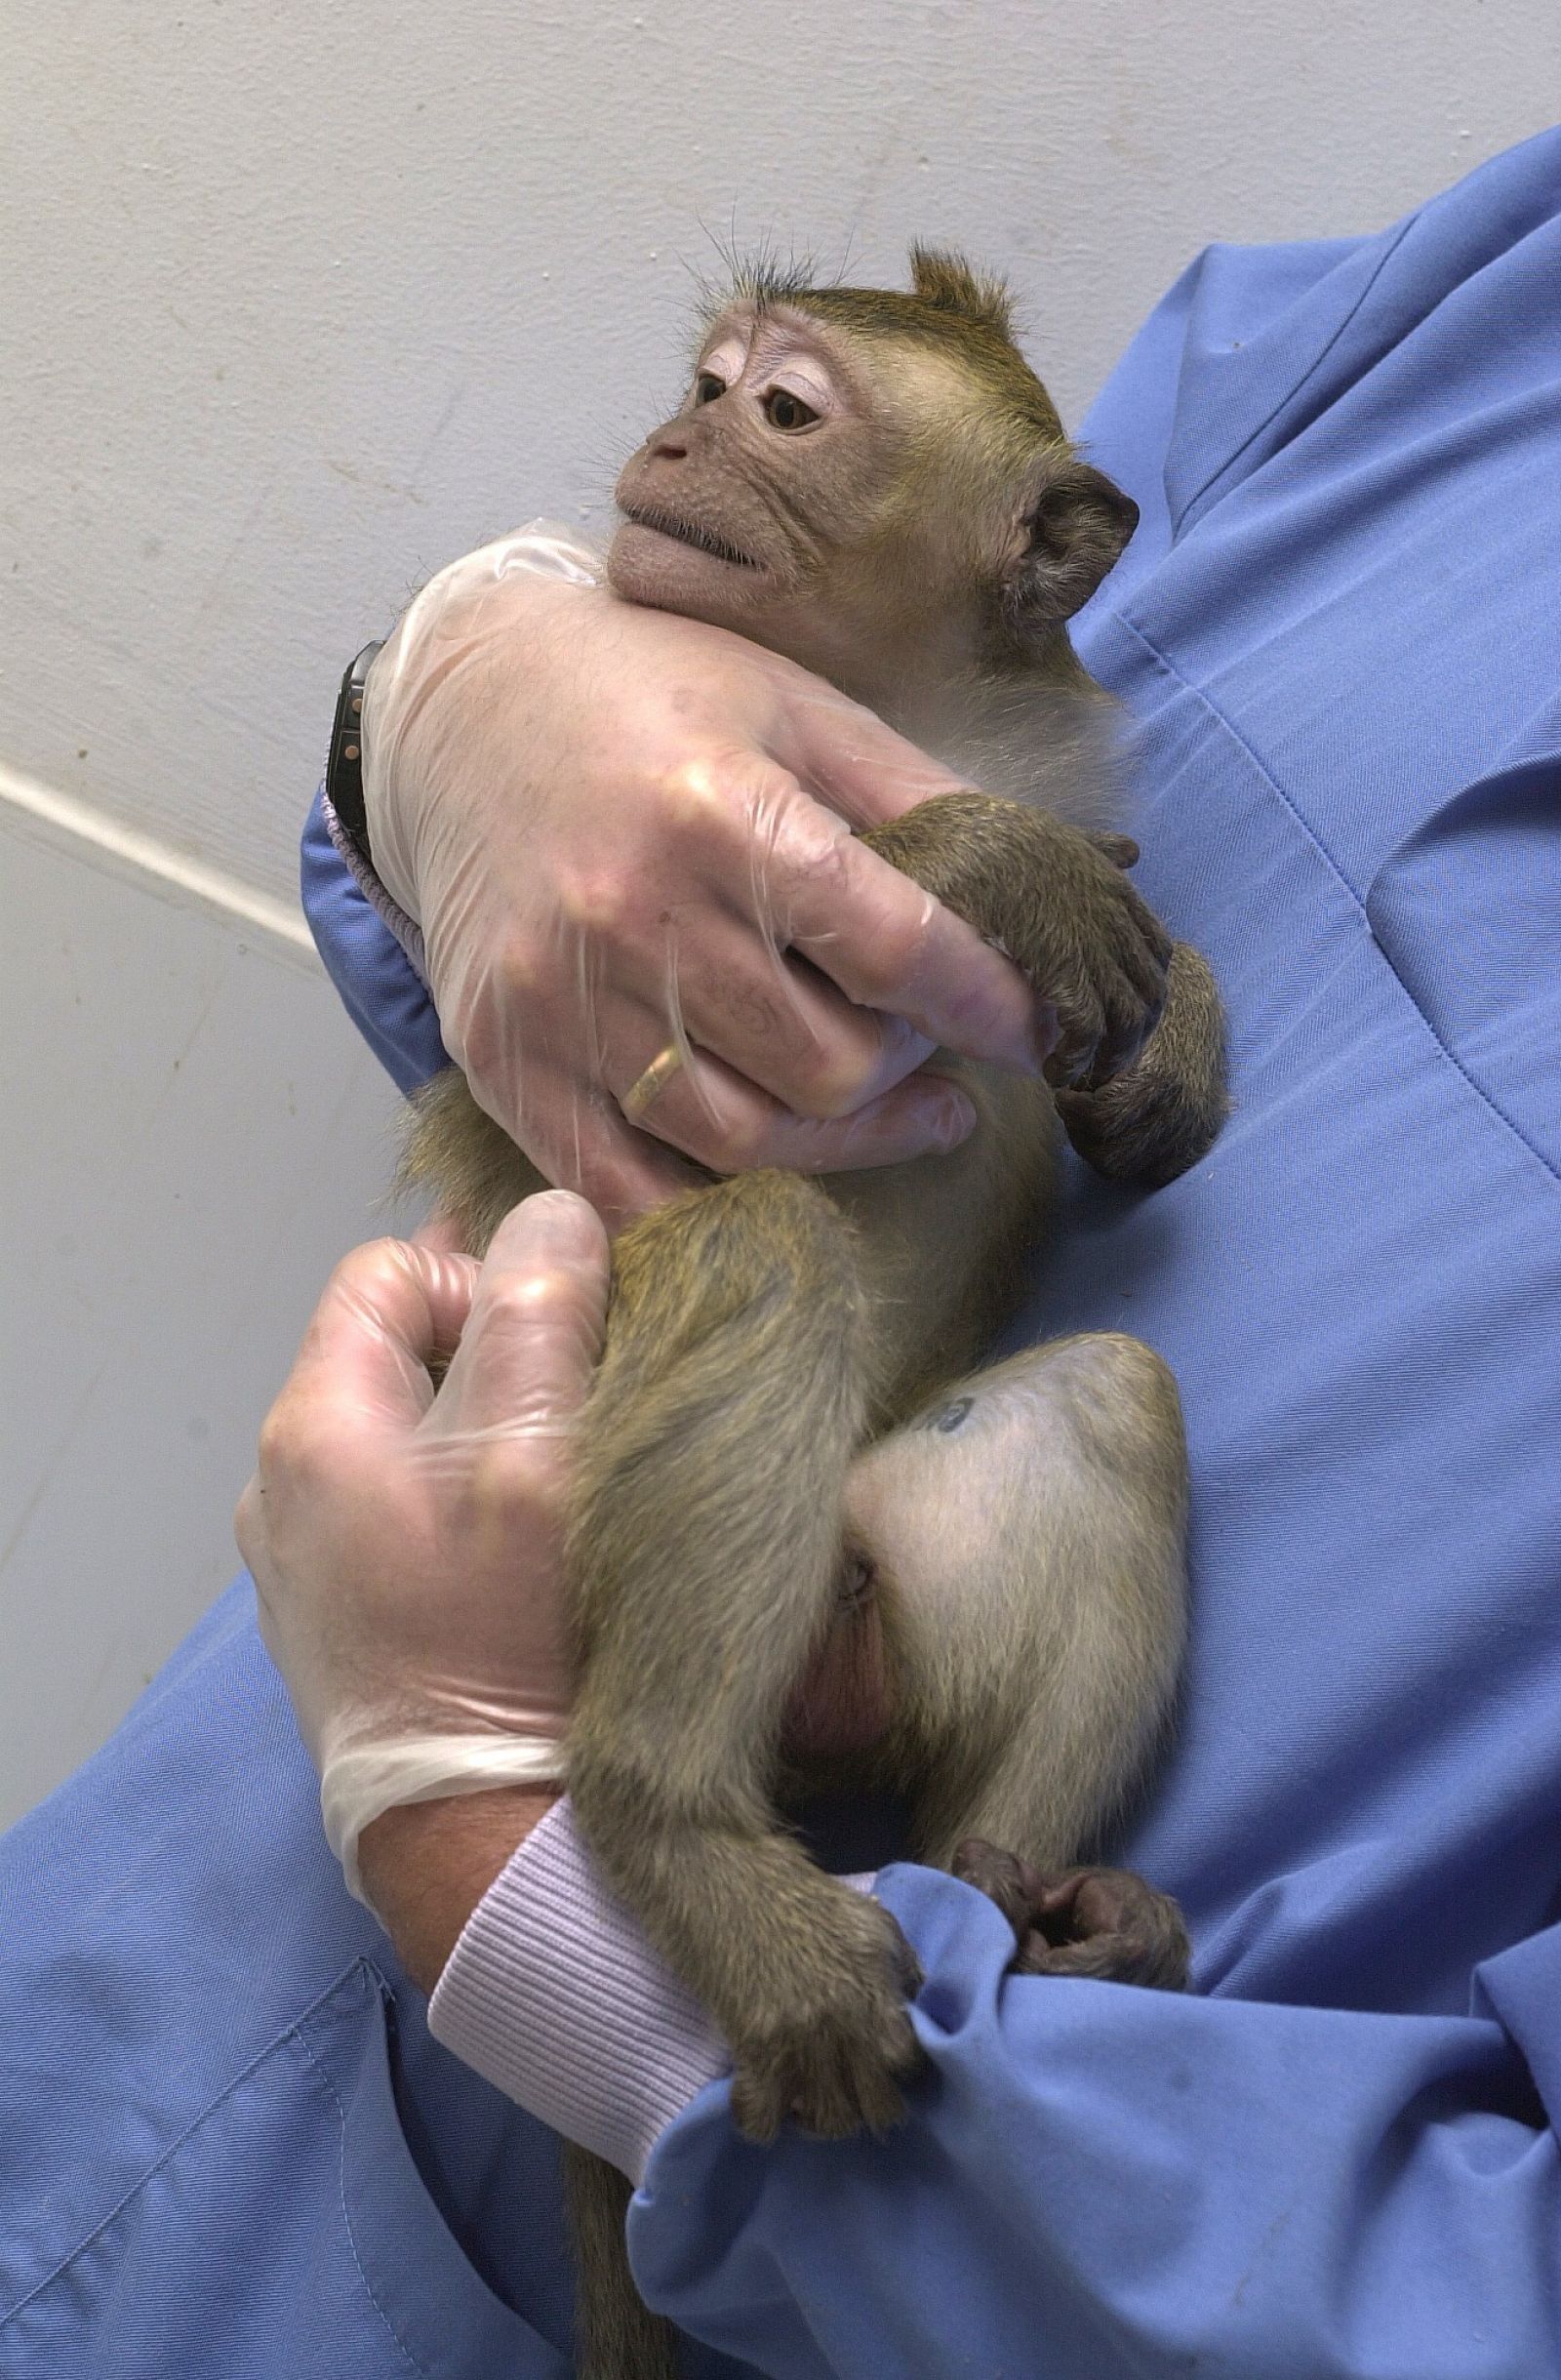 Technician holds baby macaque